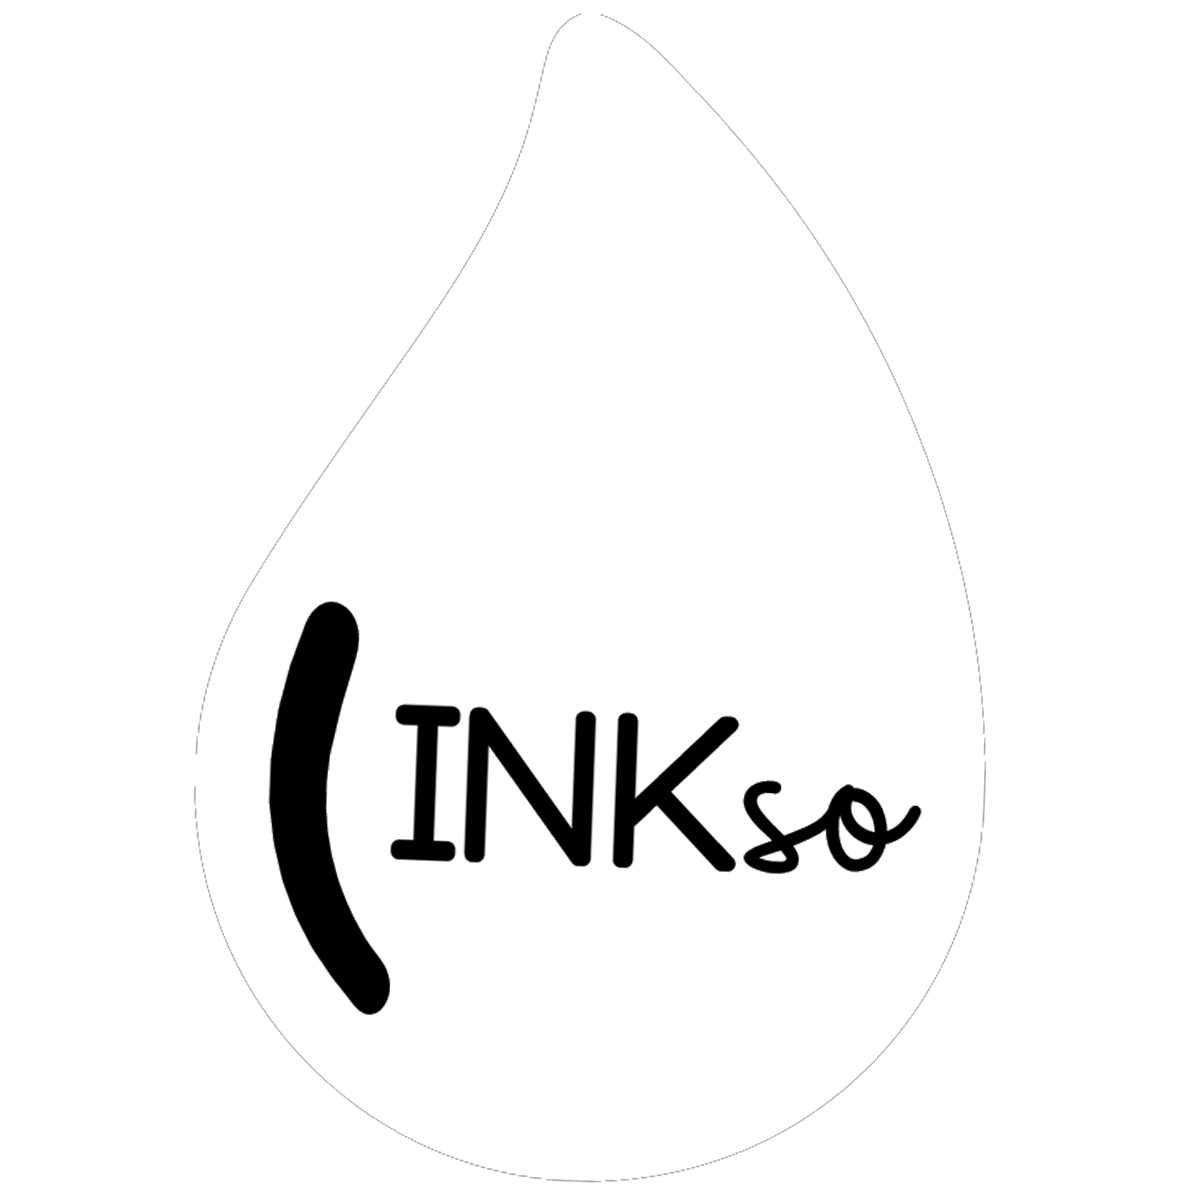 INKso